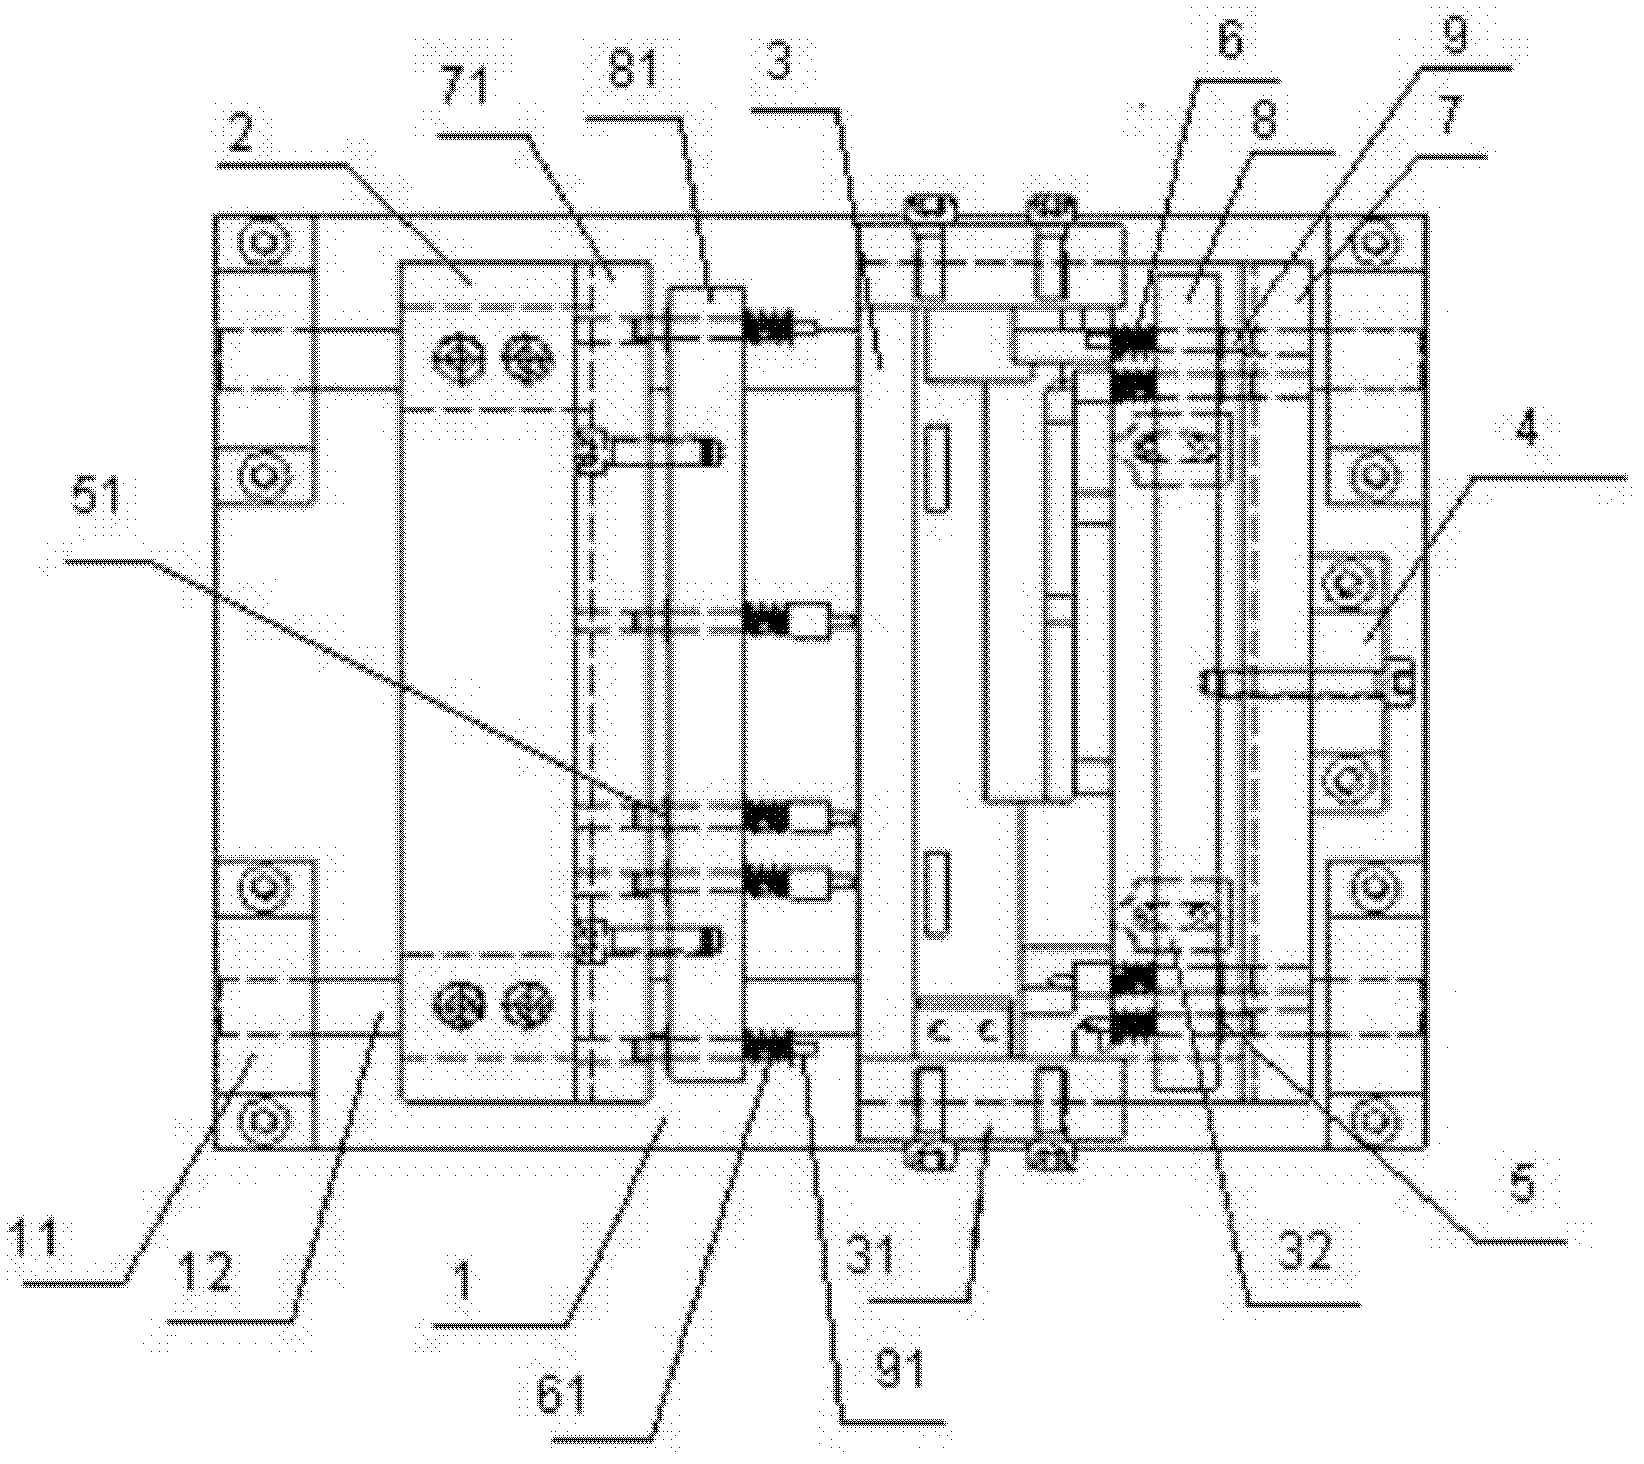 Semi-automatic device for radiating fin